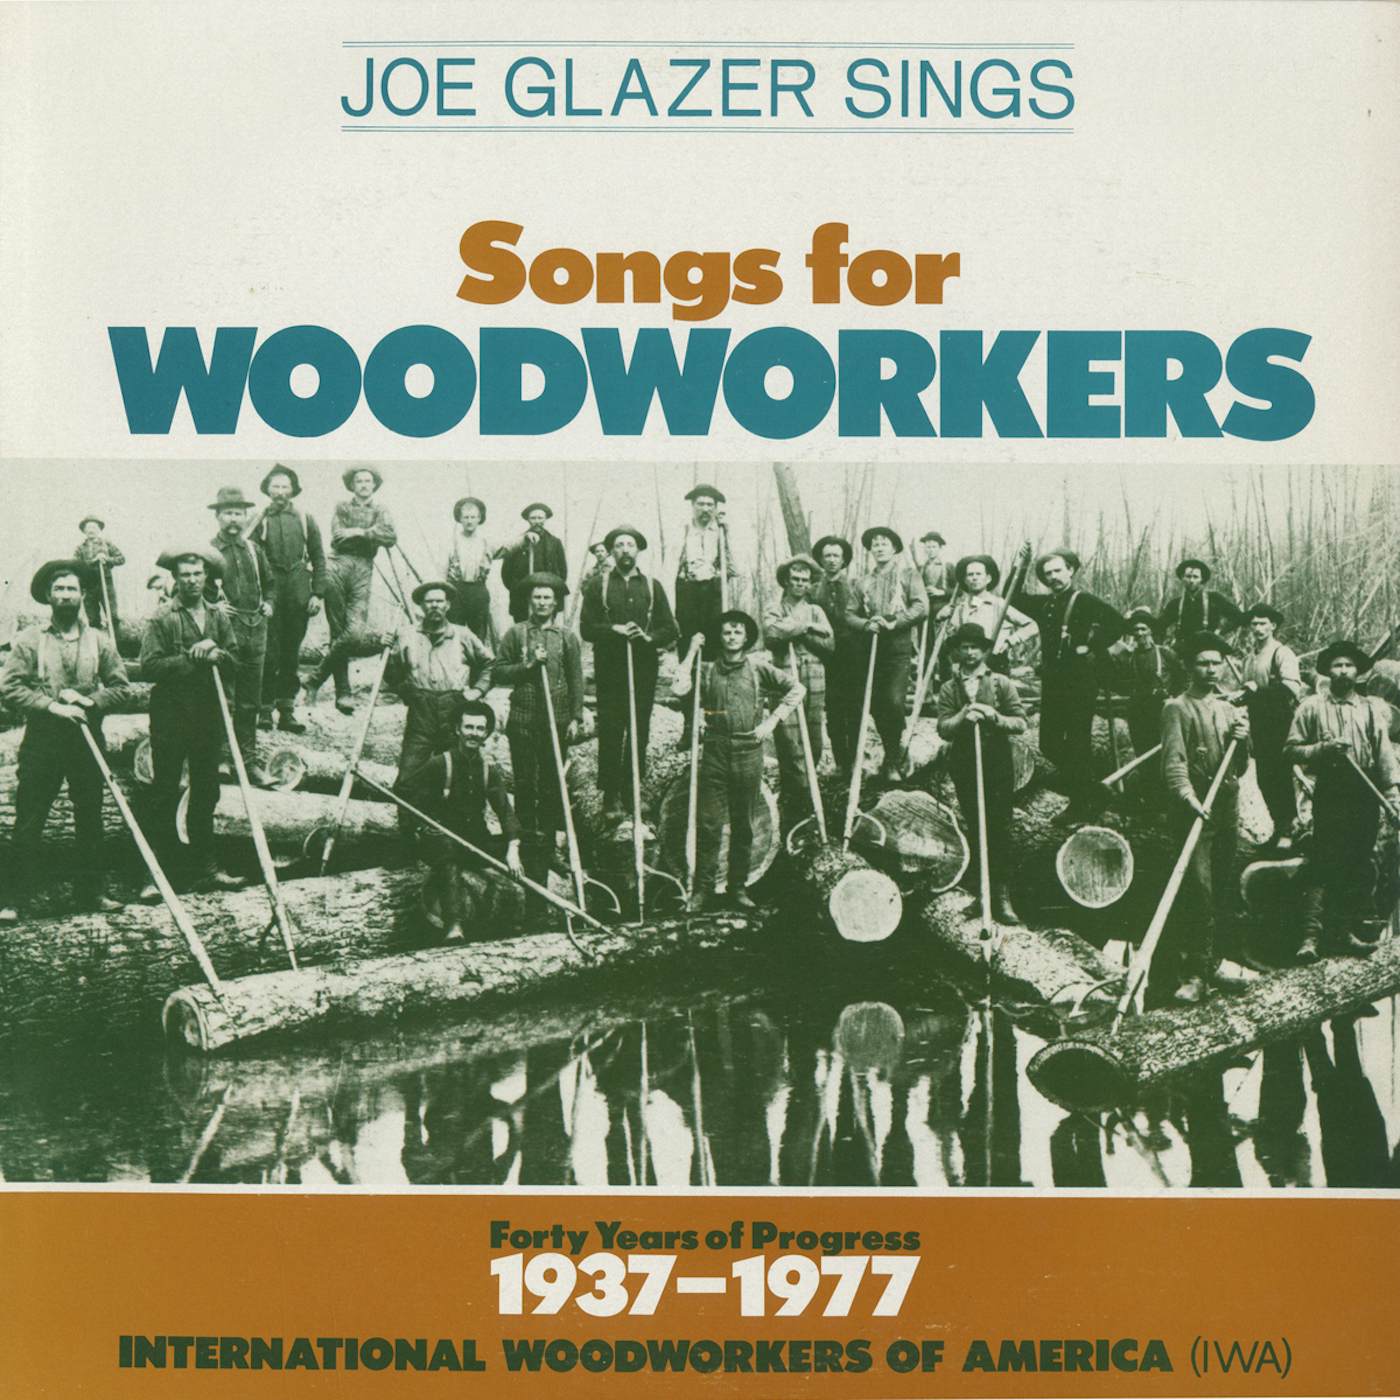 Joe Glazer SONGS FOR WOODWORKERS CD